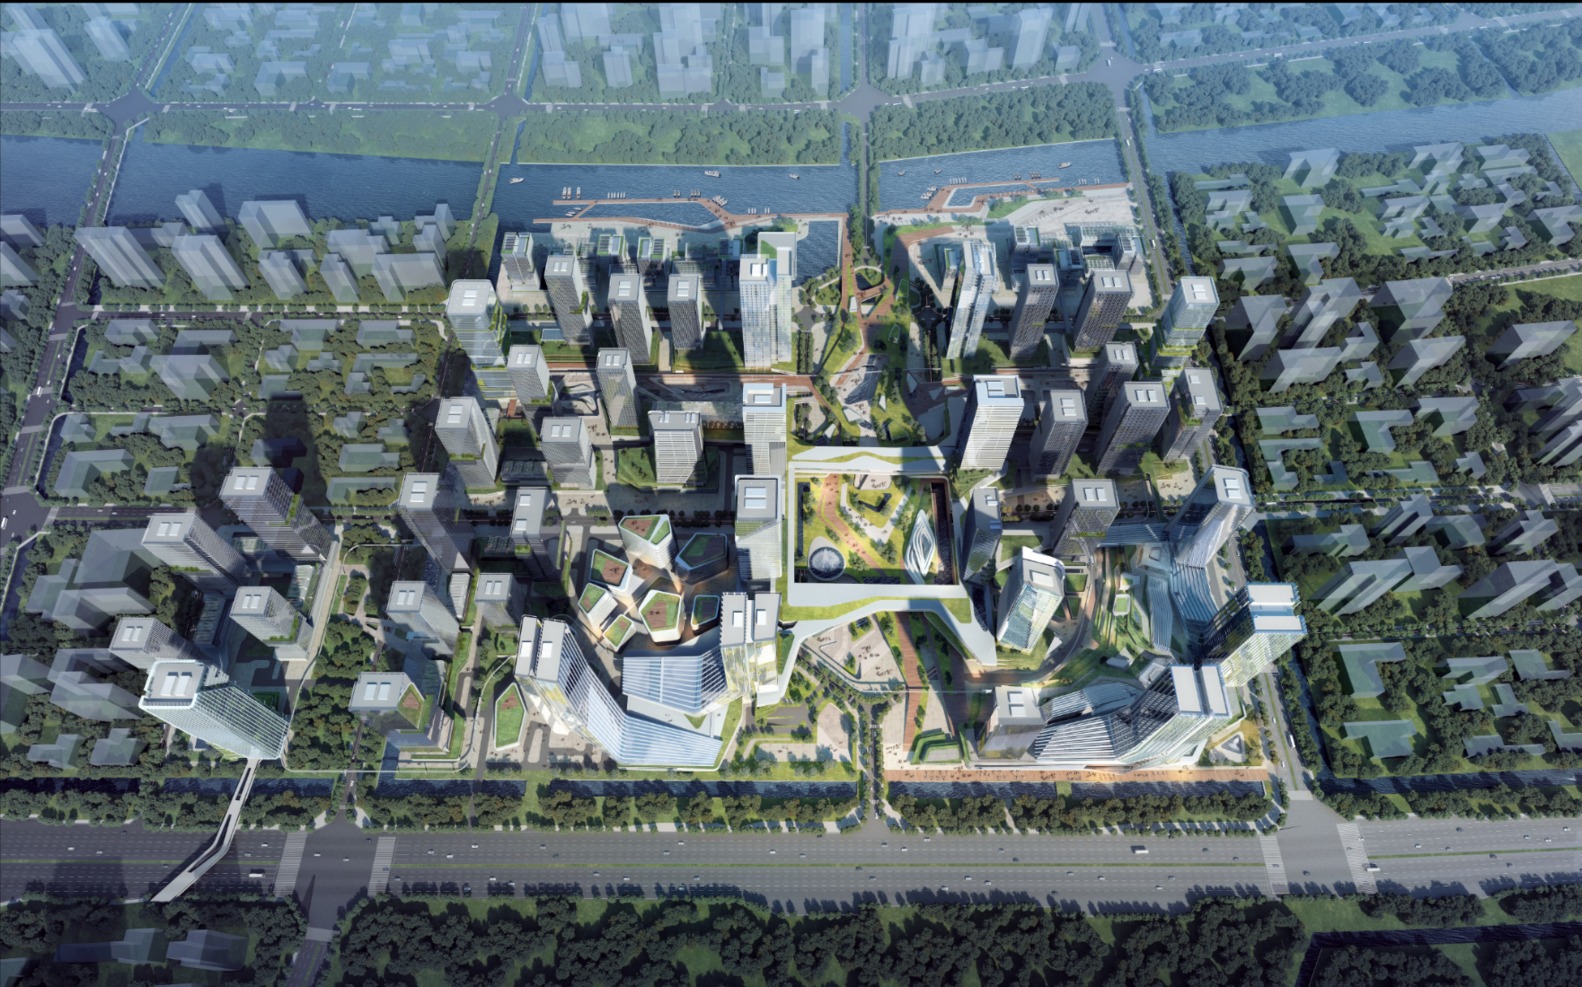 The exterior planning and design of the Hengqin Vientiane World International Commercial Complex